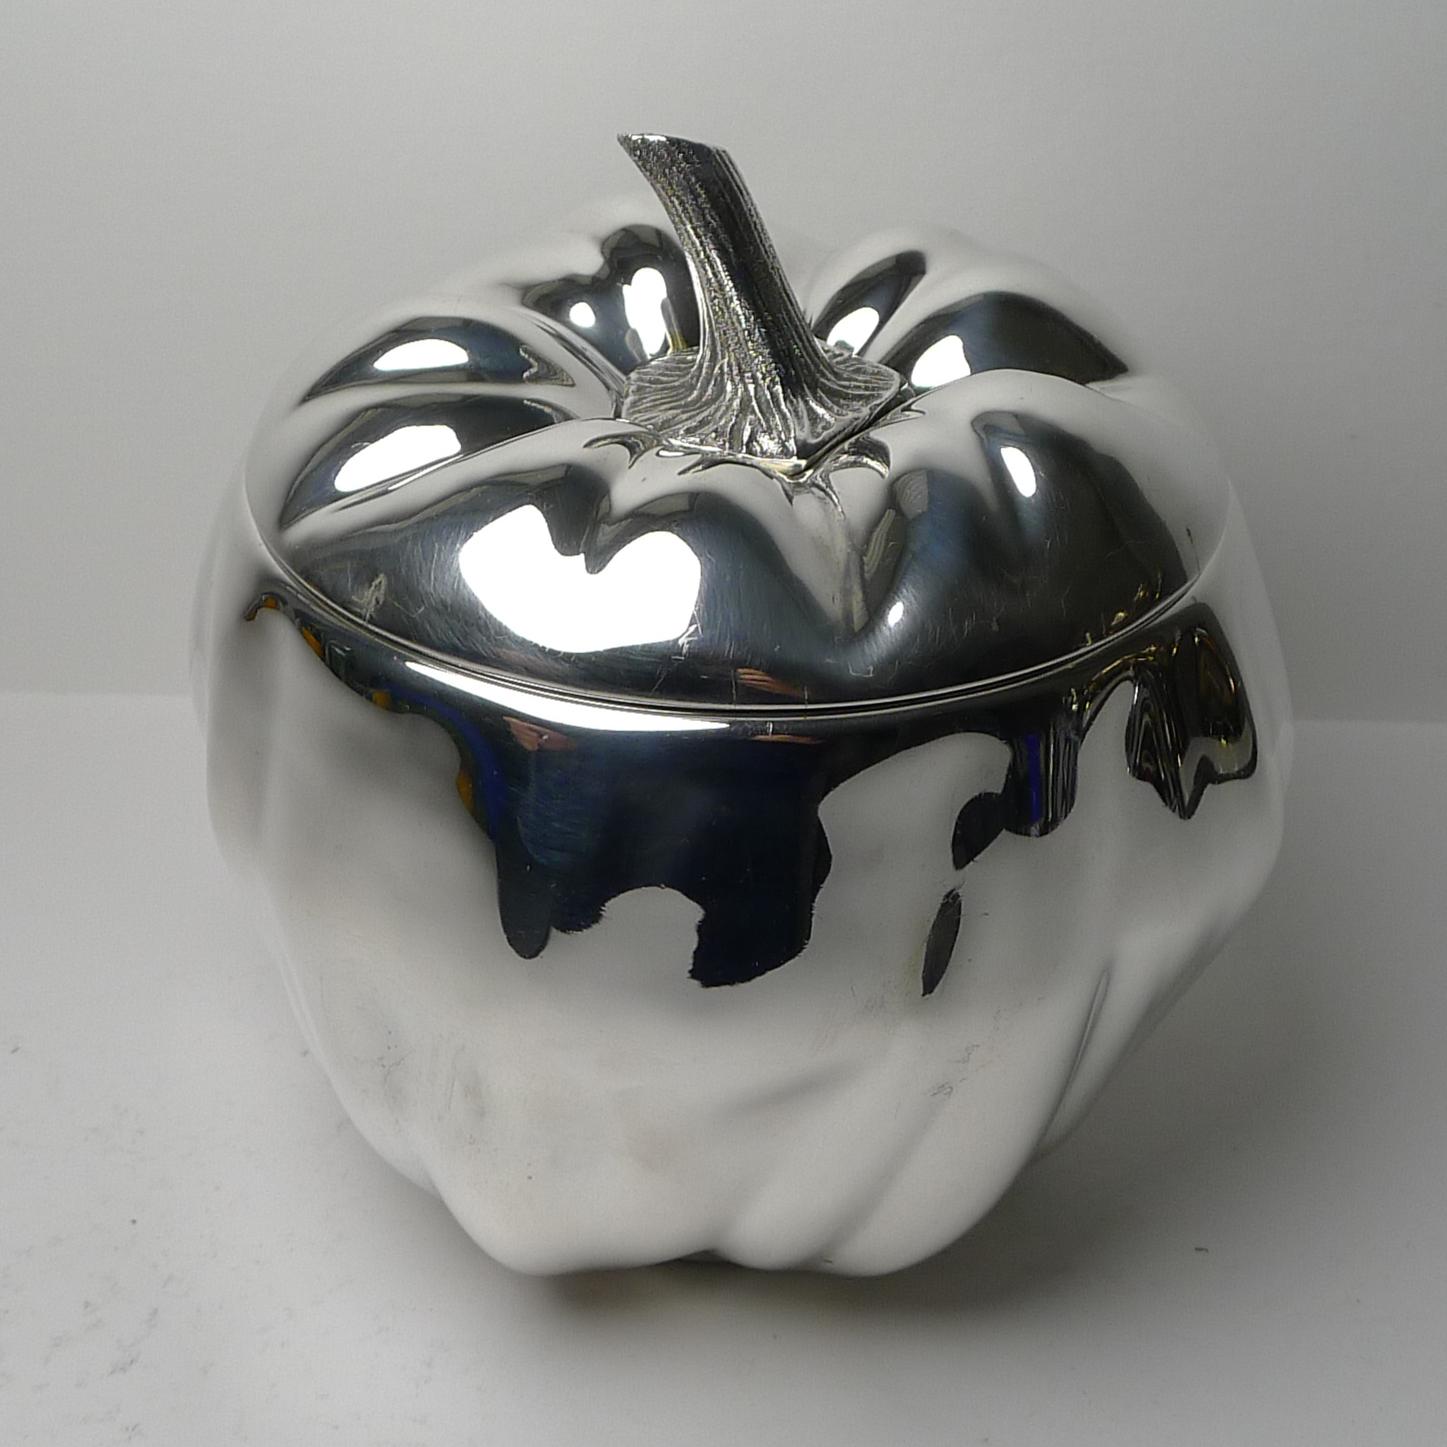 20th Century Vintage Silver Plated Pumpkin Ice Bucket by Teghini, Firenze, Italy c.1970 For Sale